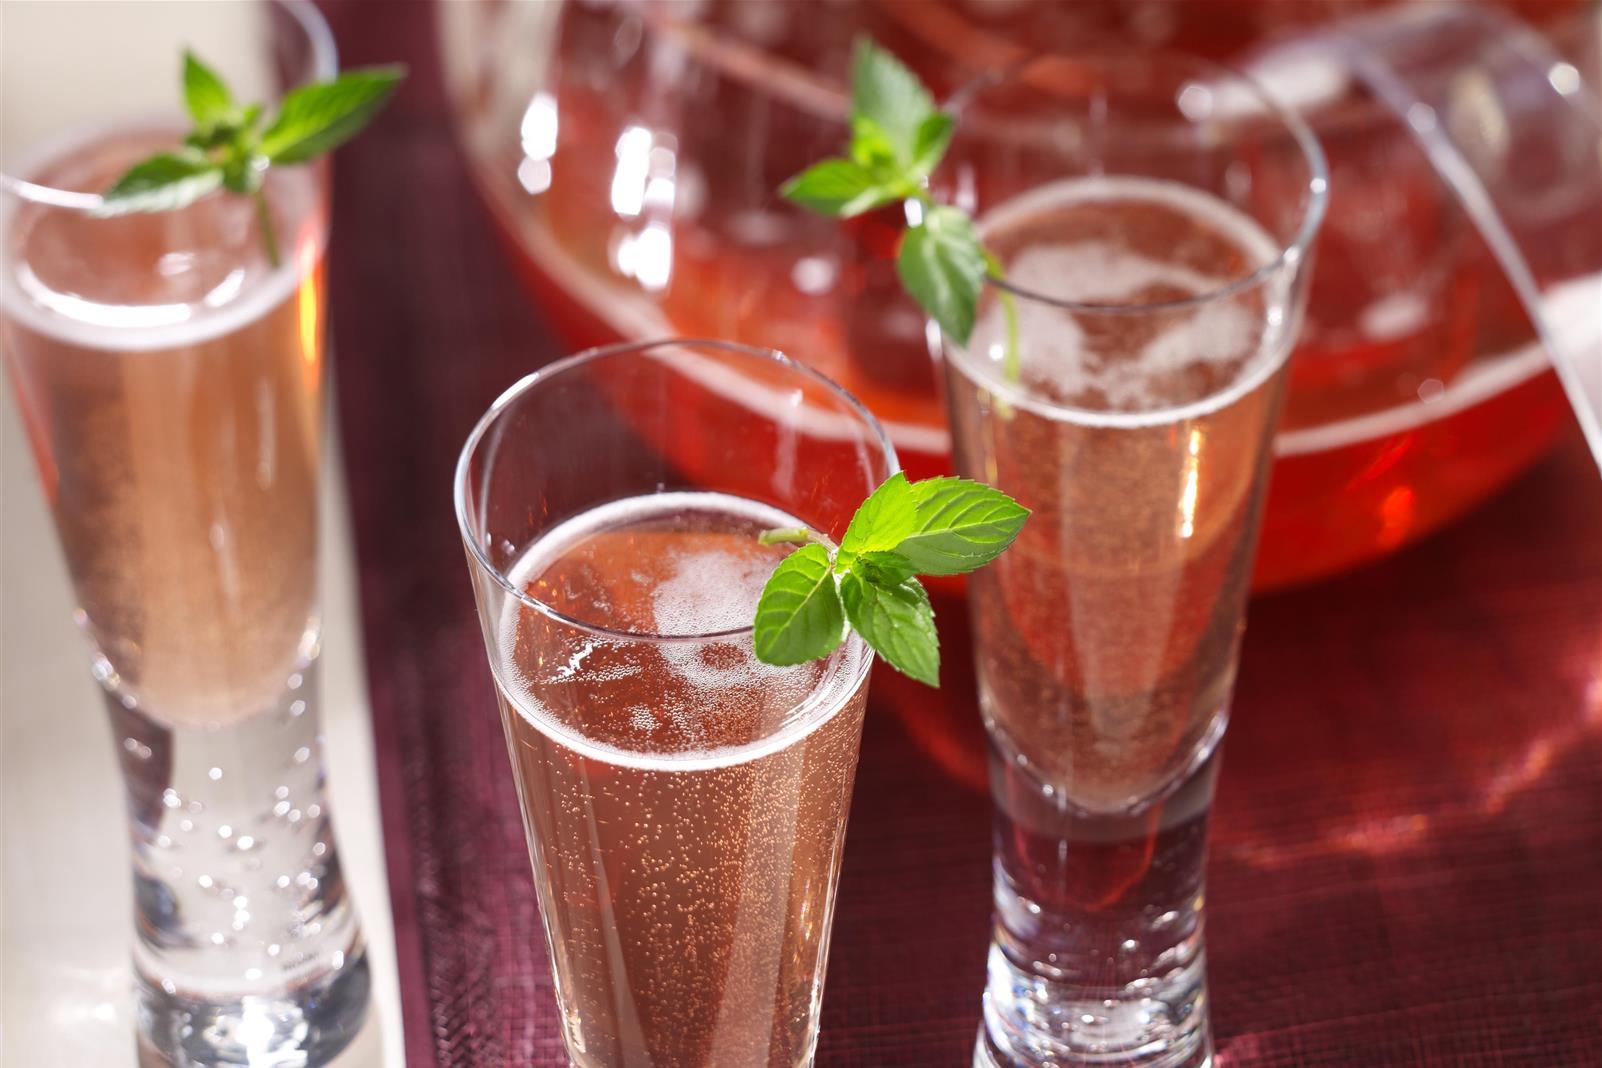 Champagne and Cranberry Juice Sparkling Punch